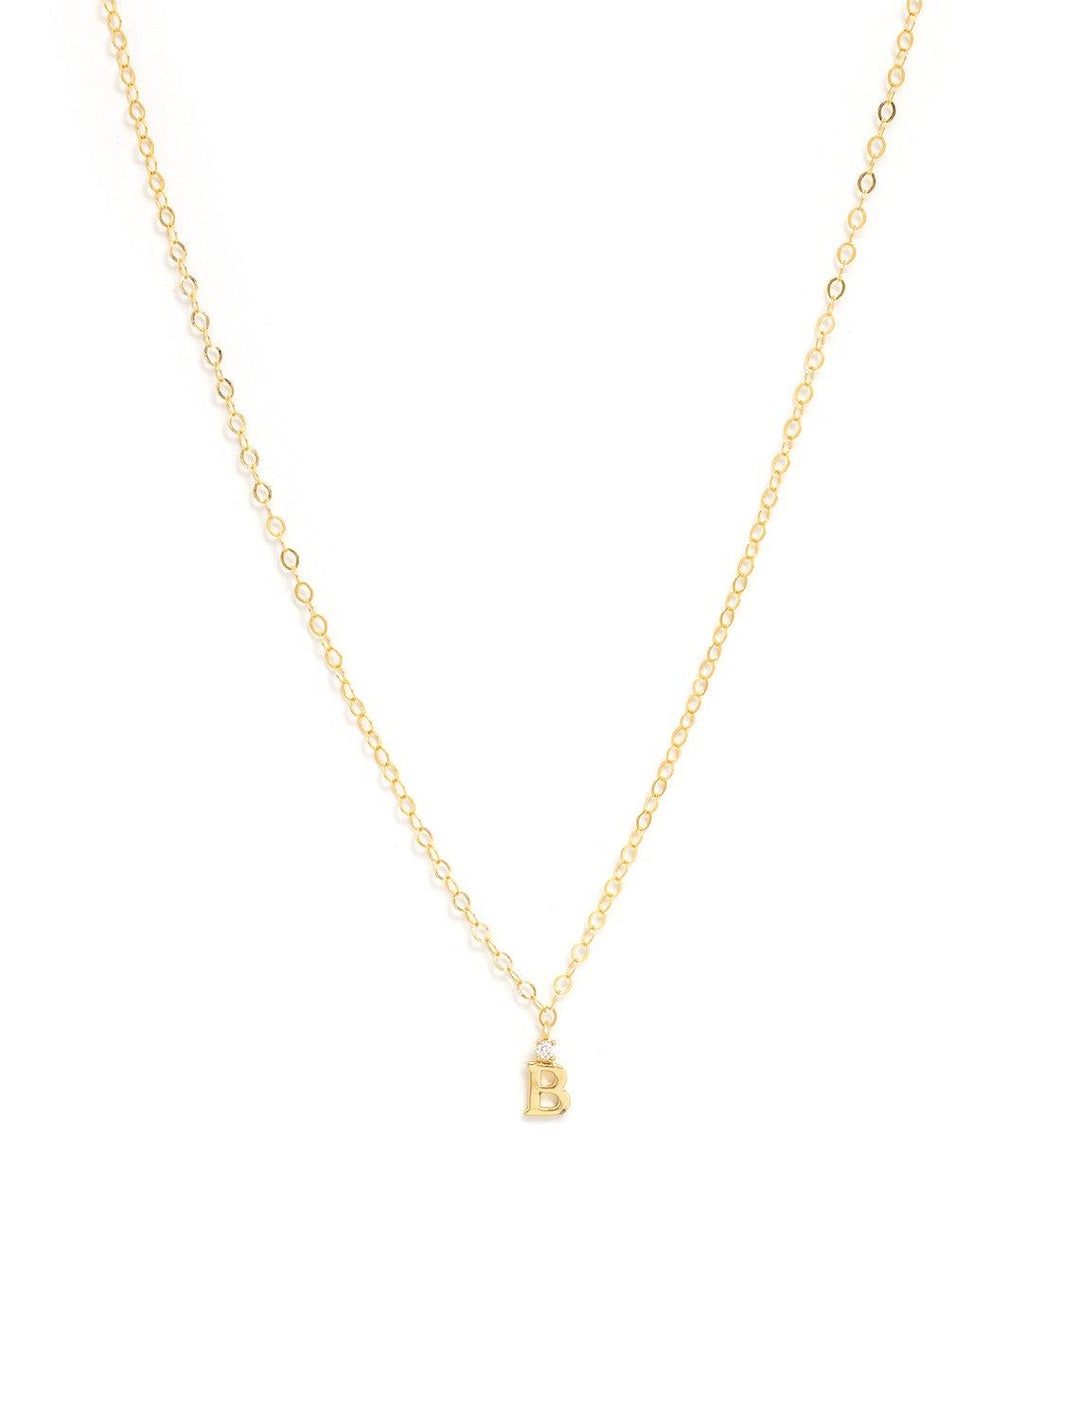 Marit Rae initial and cz necklace in gold | B - Twigs